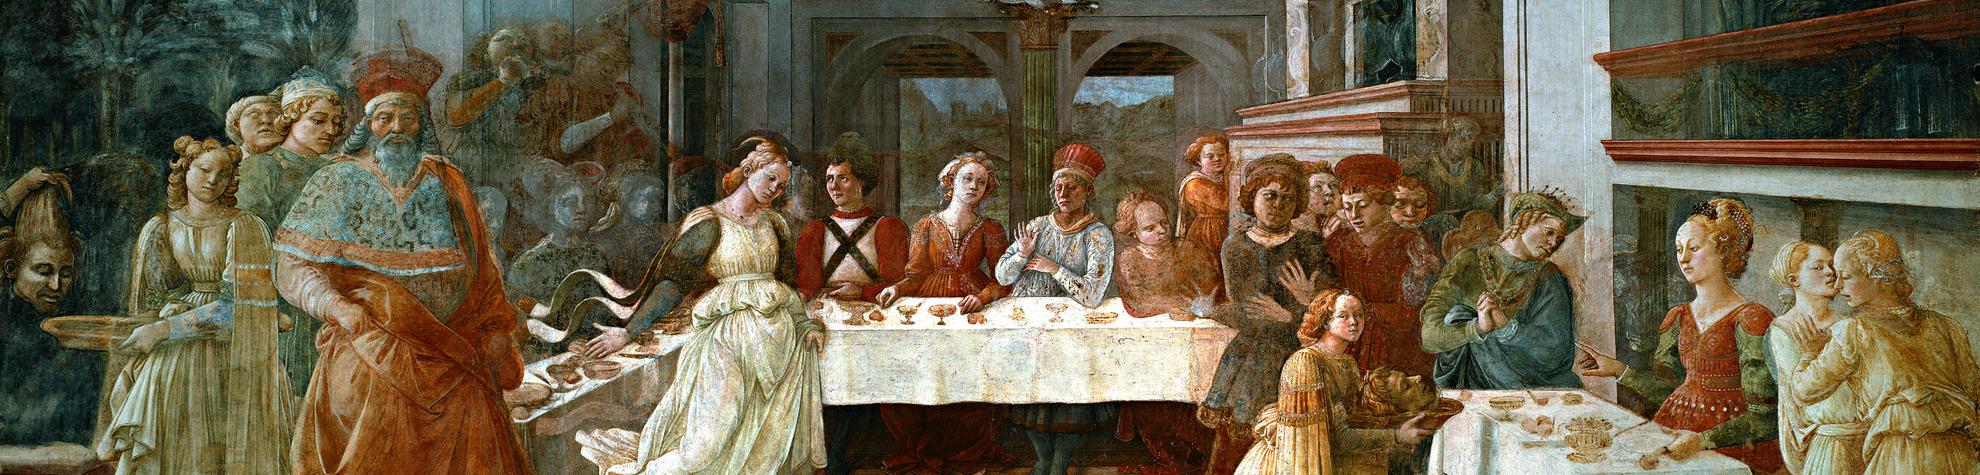 There are some diners seated at in a Reinassance palace. On the left there re King Herod and Salomè dancing, while on the right an handmaid shows the Baptist's head on a plate to Queen Herodias seated.